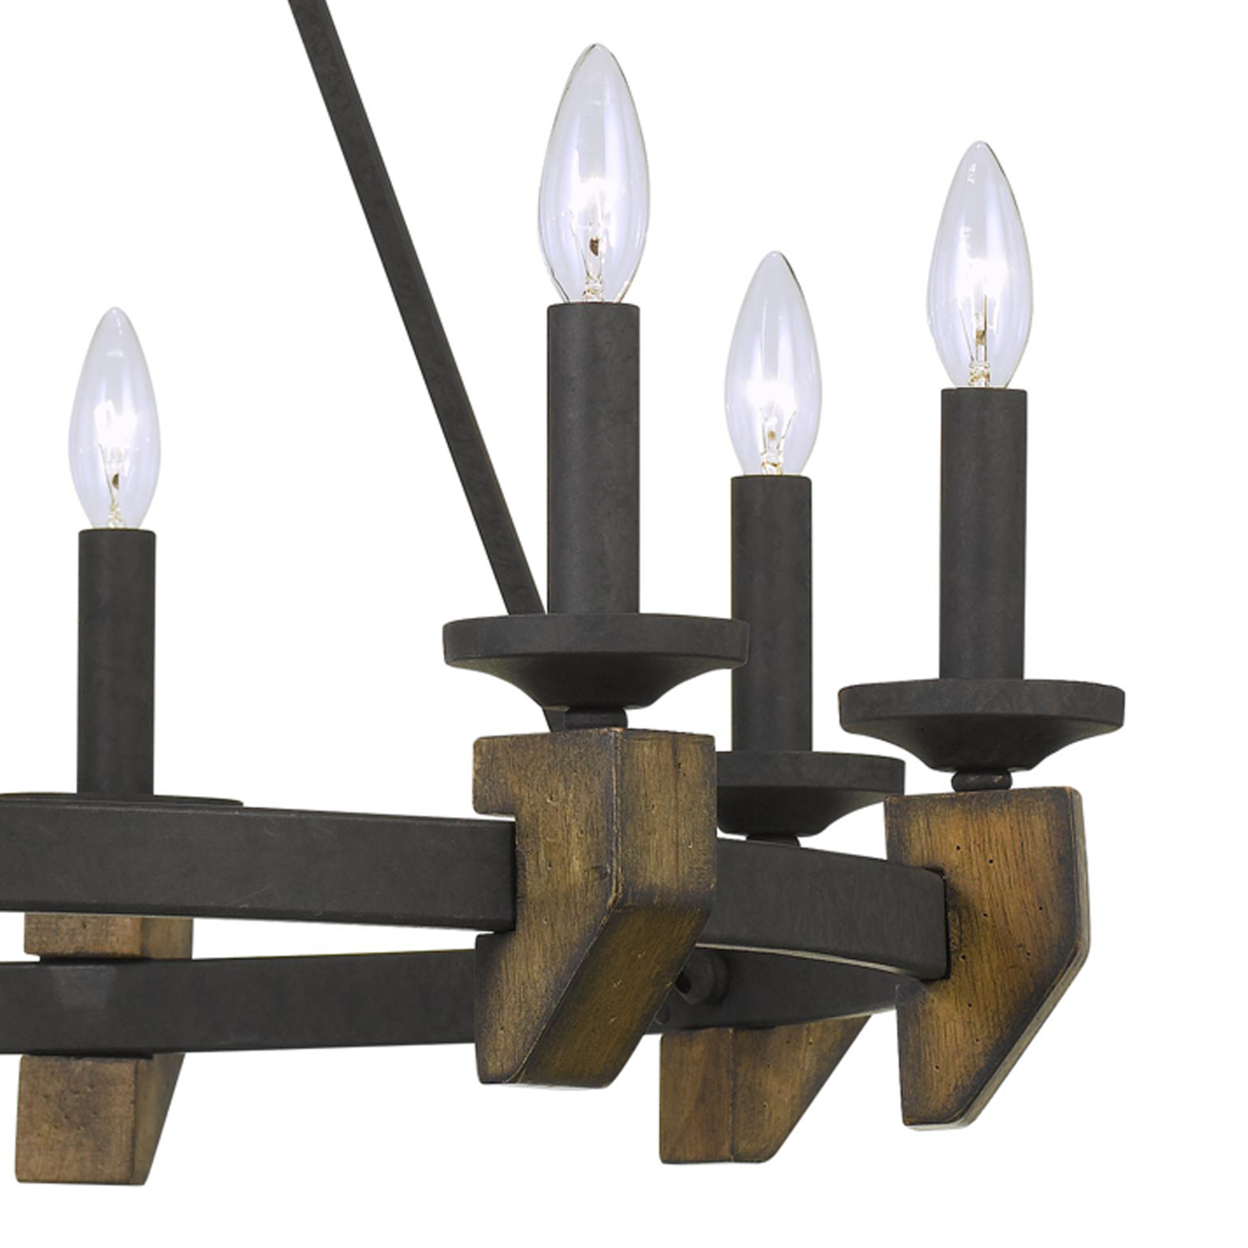 9 Bulb Round Metal Chandelier With Candle Lights And Wooden Accents, Black- Saltoro Sherpi